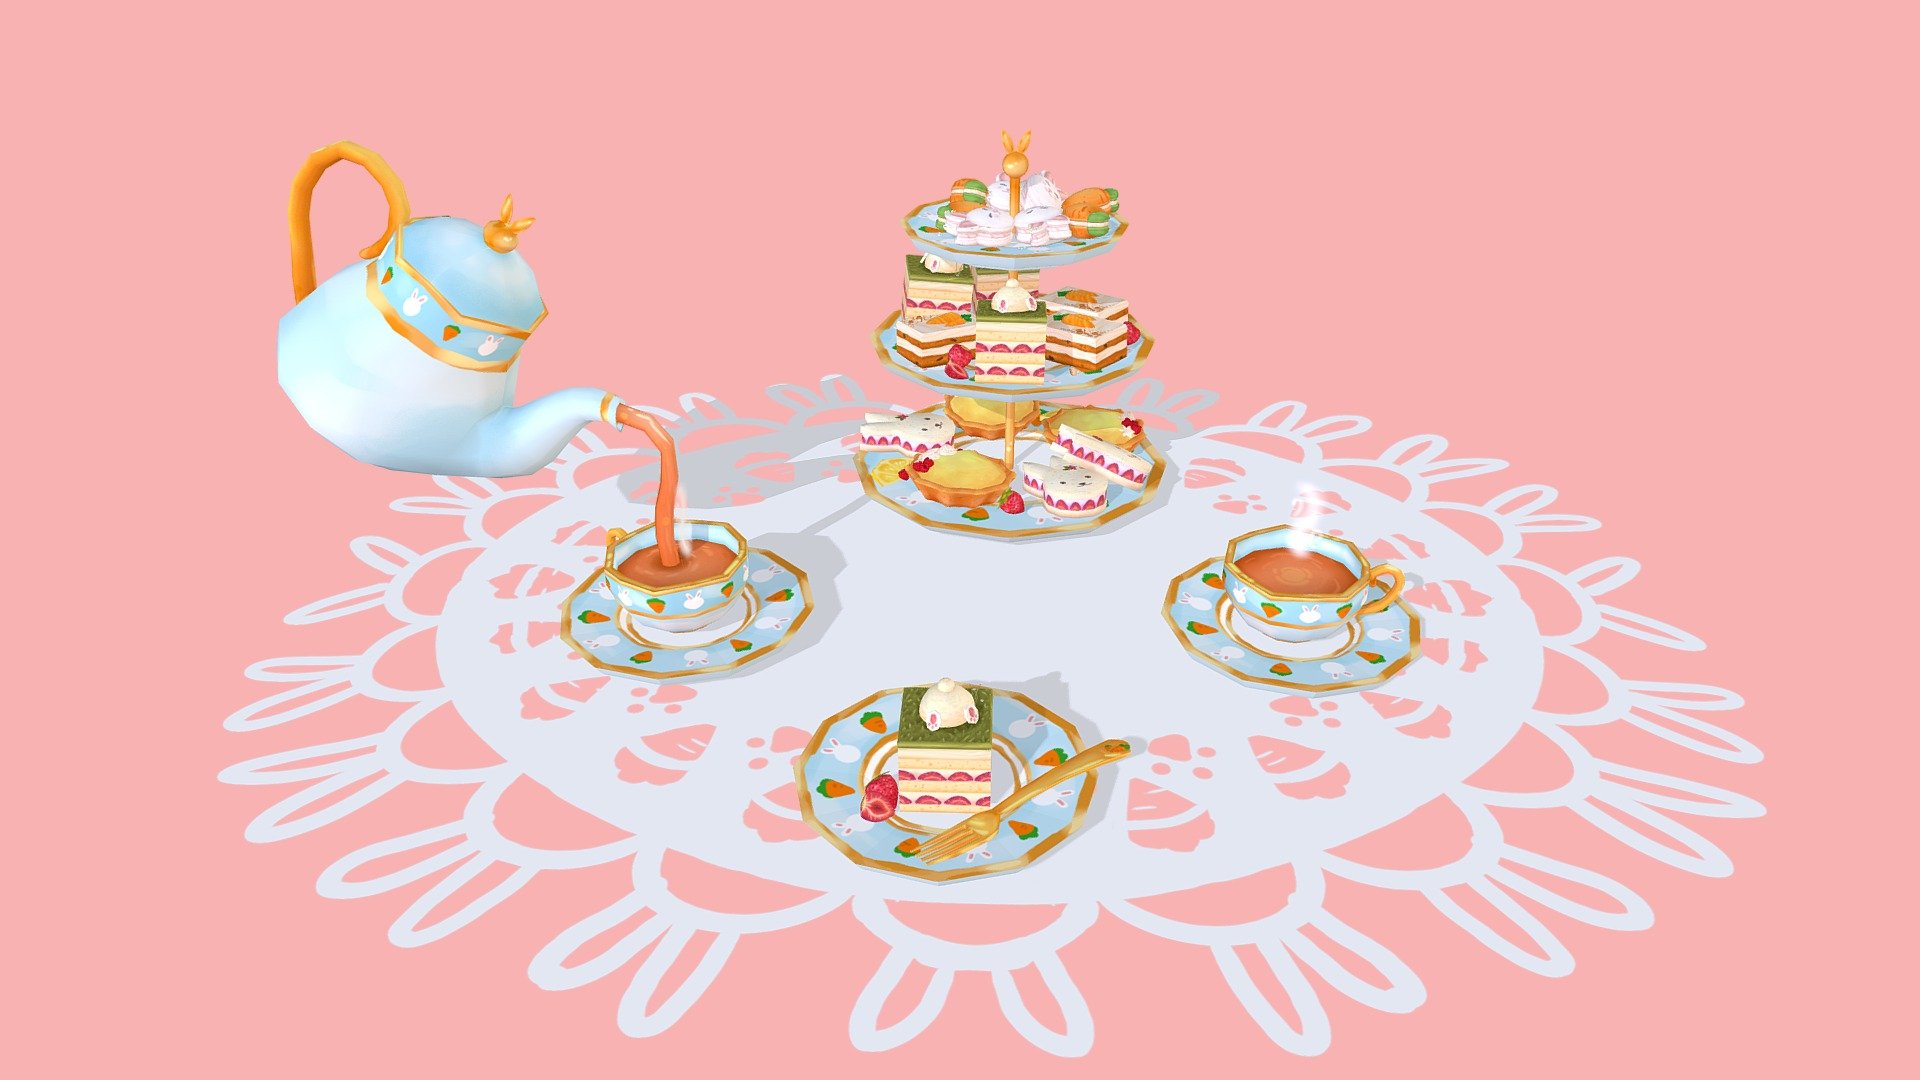 I really wanted to hand paint some desserts so I created this cute bunny themed tea party! 
It was really fun looking at references to decide what type of desserts I wanted and making sure they were on theme. 
My favorite is probably the bunny butt cake because that concept is just so adorable.

You can see more about this project on my artstation: https://www.artstation.com/artwork/Wm1wO3 - Bunny Tea Party - 3D model by Zayna (@ZayKay) 3d model